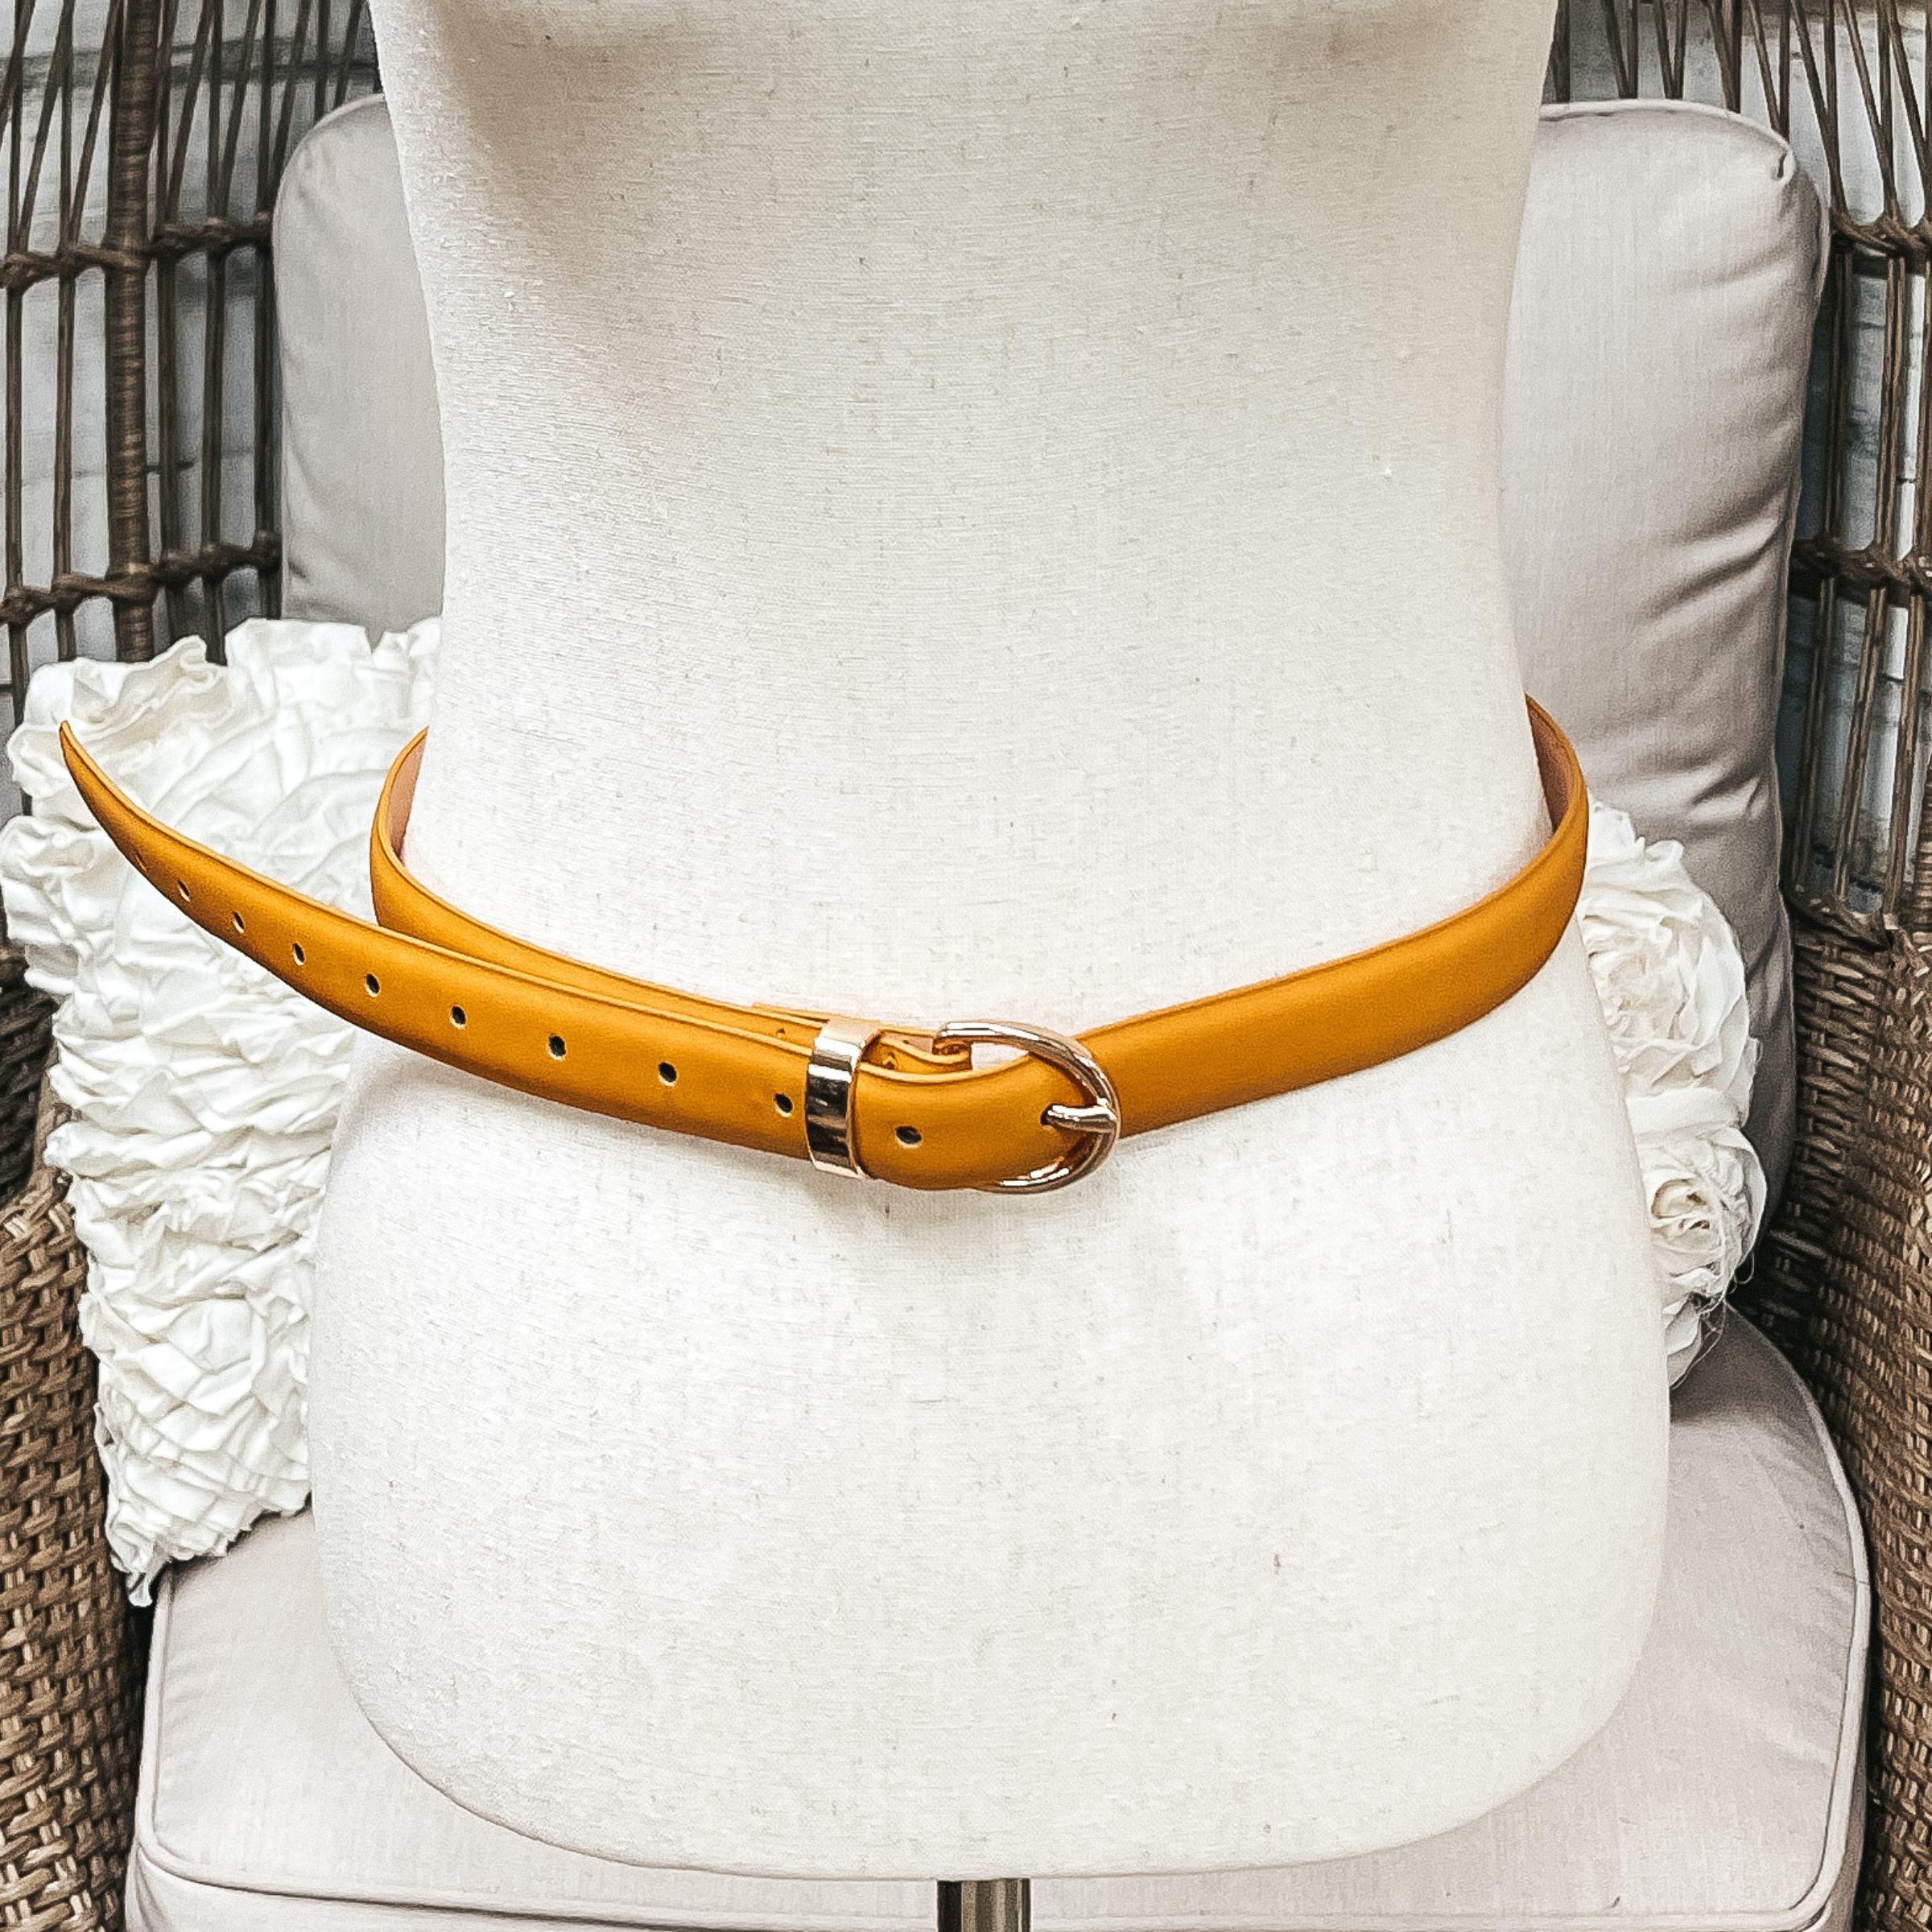 There is one skinny belt in mustard yellow with a small oval buckle in gold. The belt  is placed on an ivory mannequin.